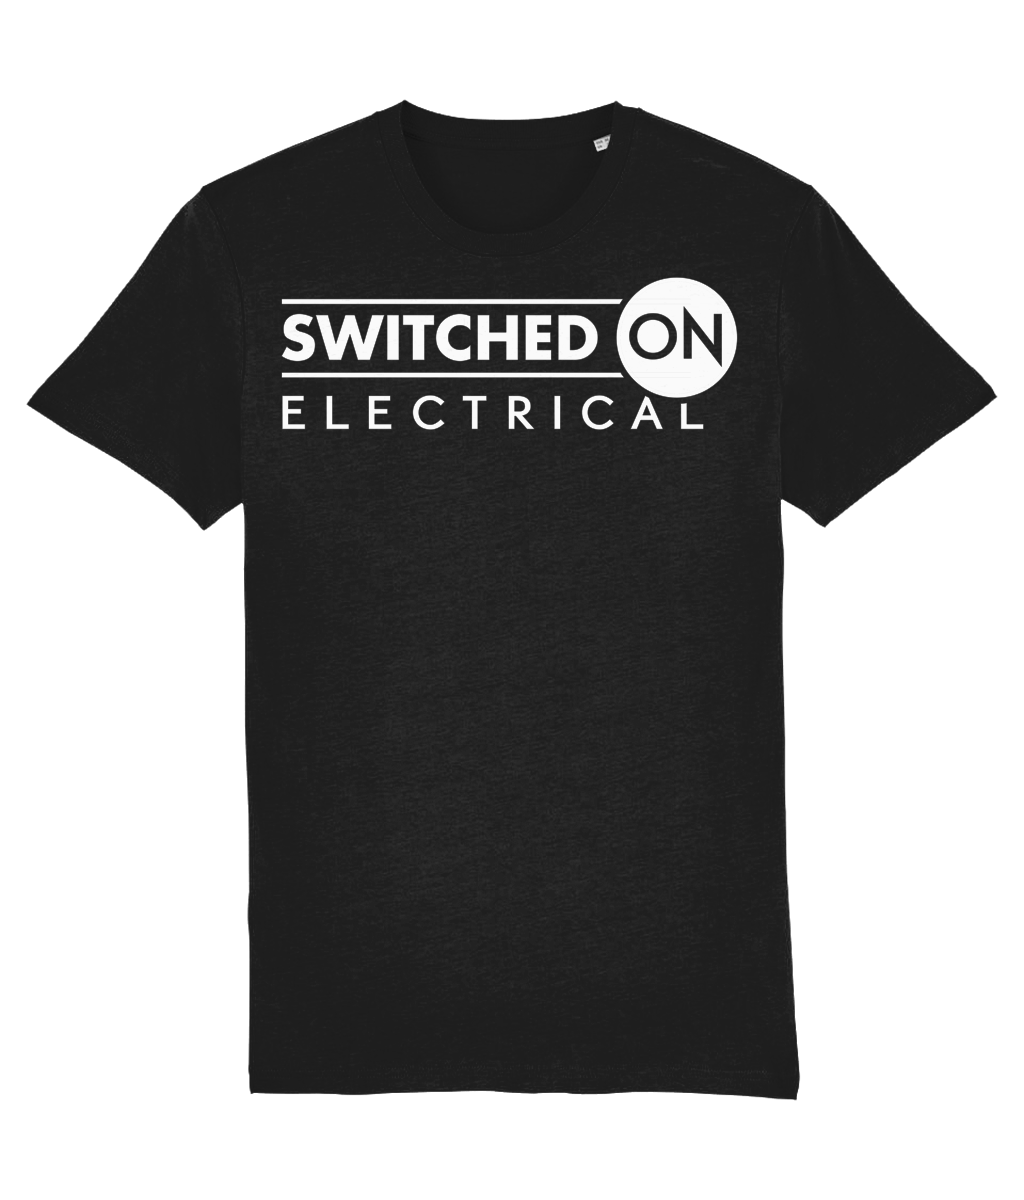 Switched on Electrical - Teeshirt - White Print